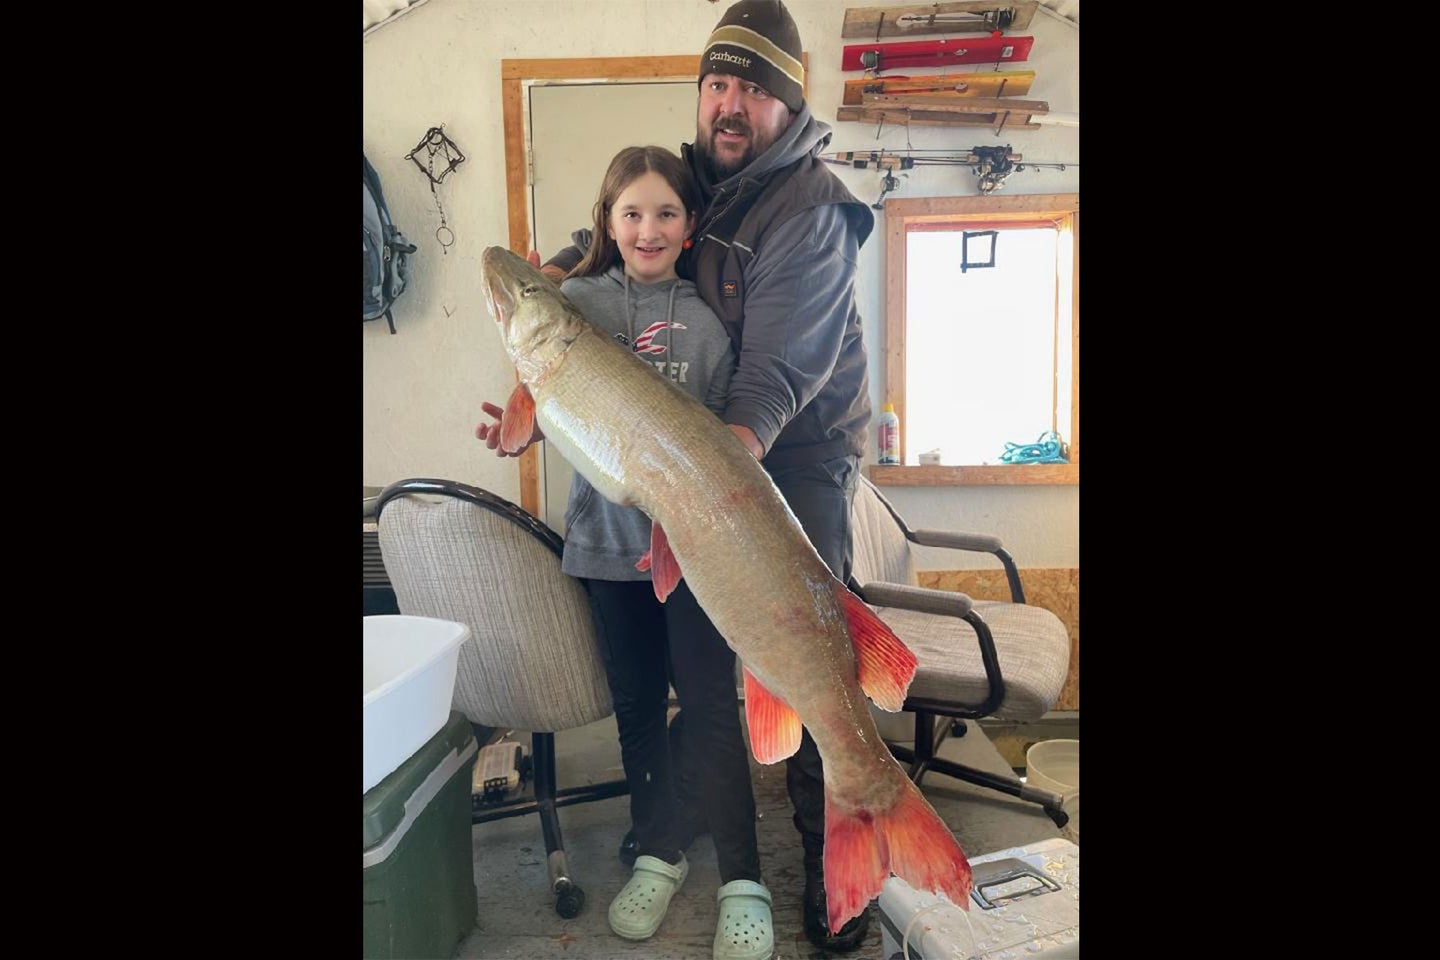 A young angler poses with a 34 pound muskie caught while ice fishing.